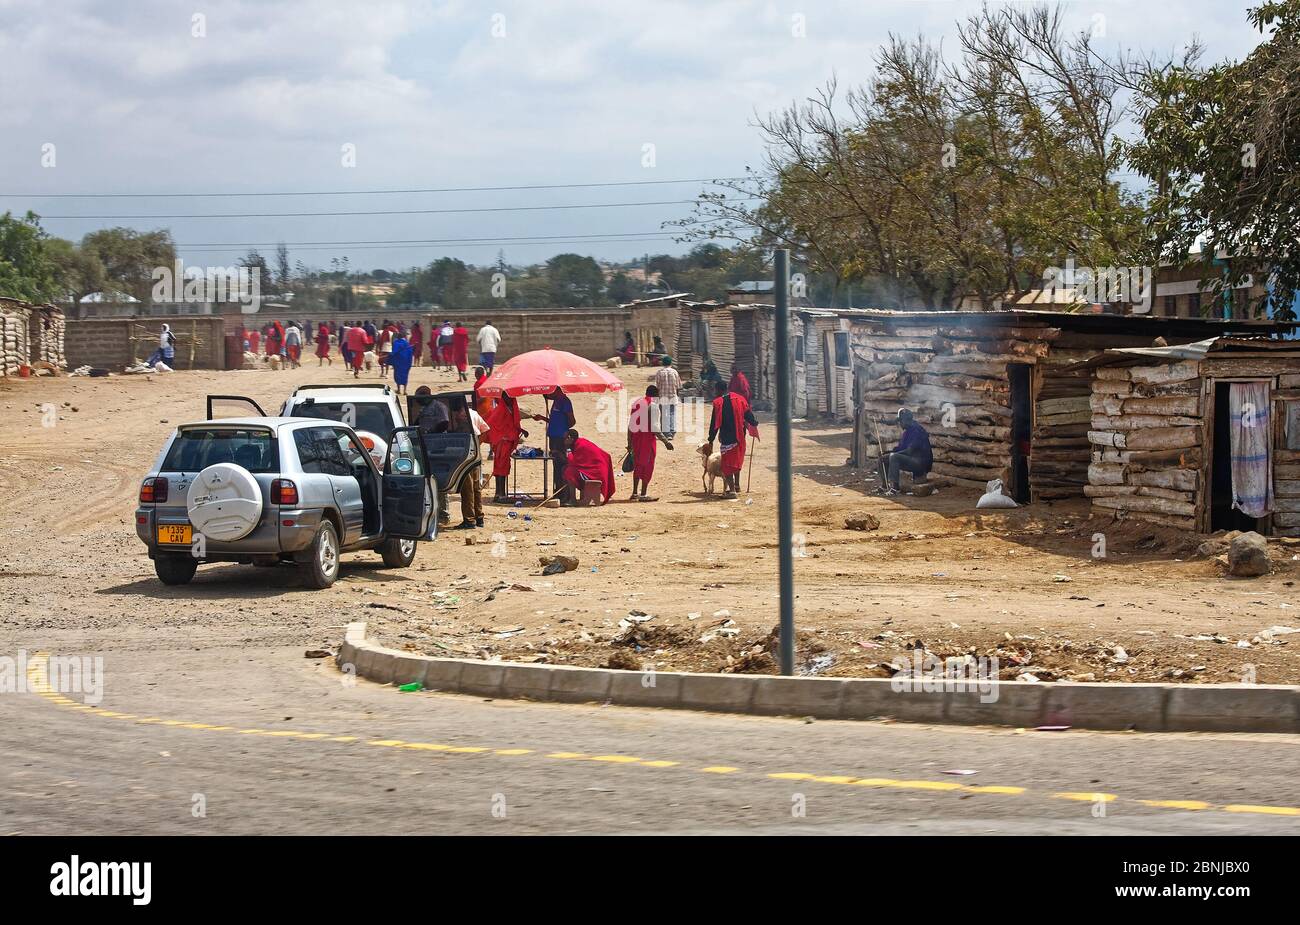 native village, small houses, people, two vehicles, wall, dirt street, lifestyle, Africa; Arusha; Tanzania Stock Photo